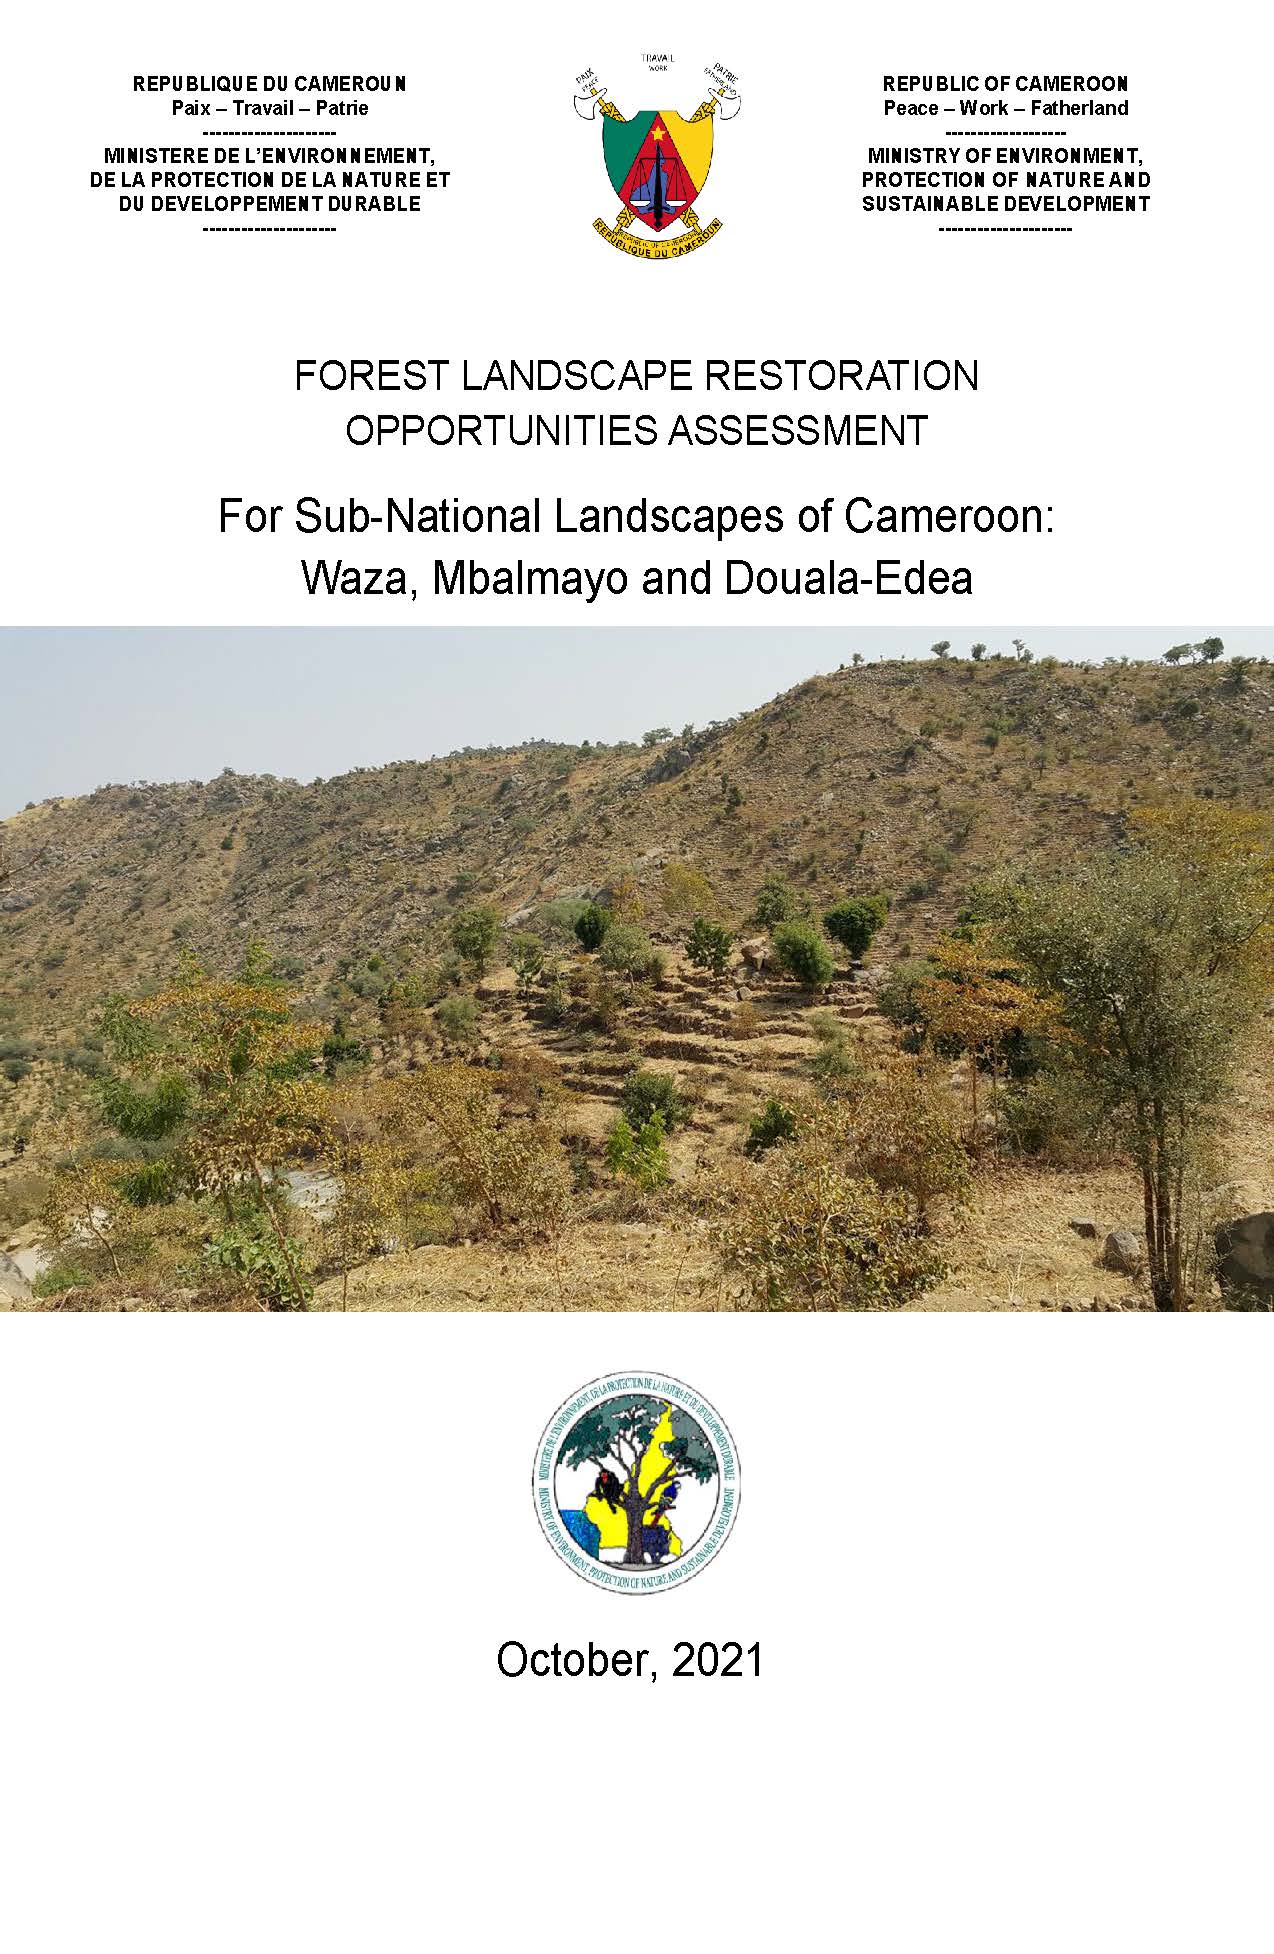 Forest Landscape Restoration Opportunity Assessment for Sub-National landscapes of Cameroon: Waza, Mbalmayo and Douala-Edea